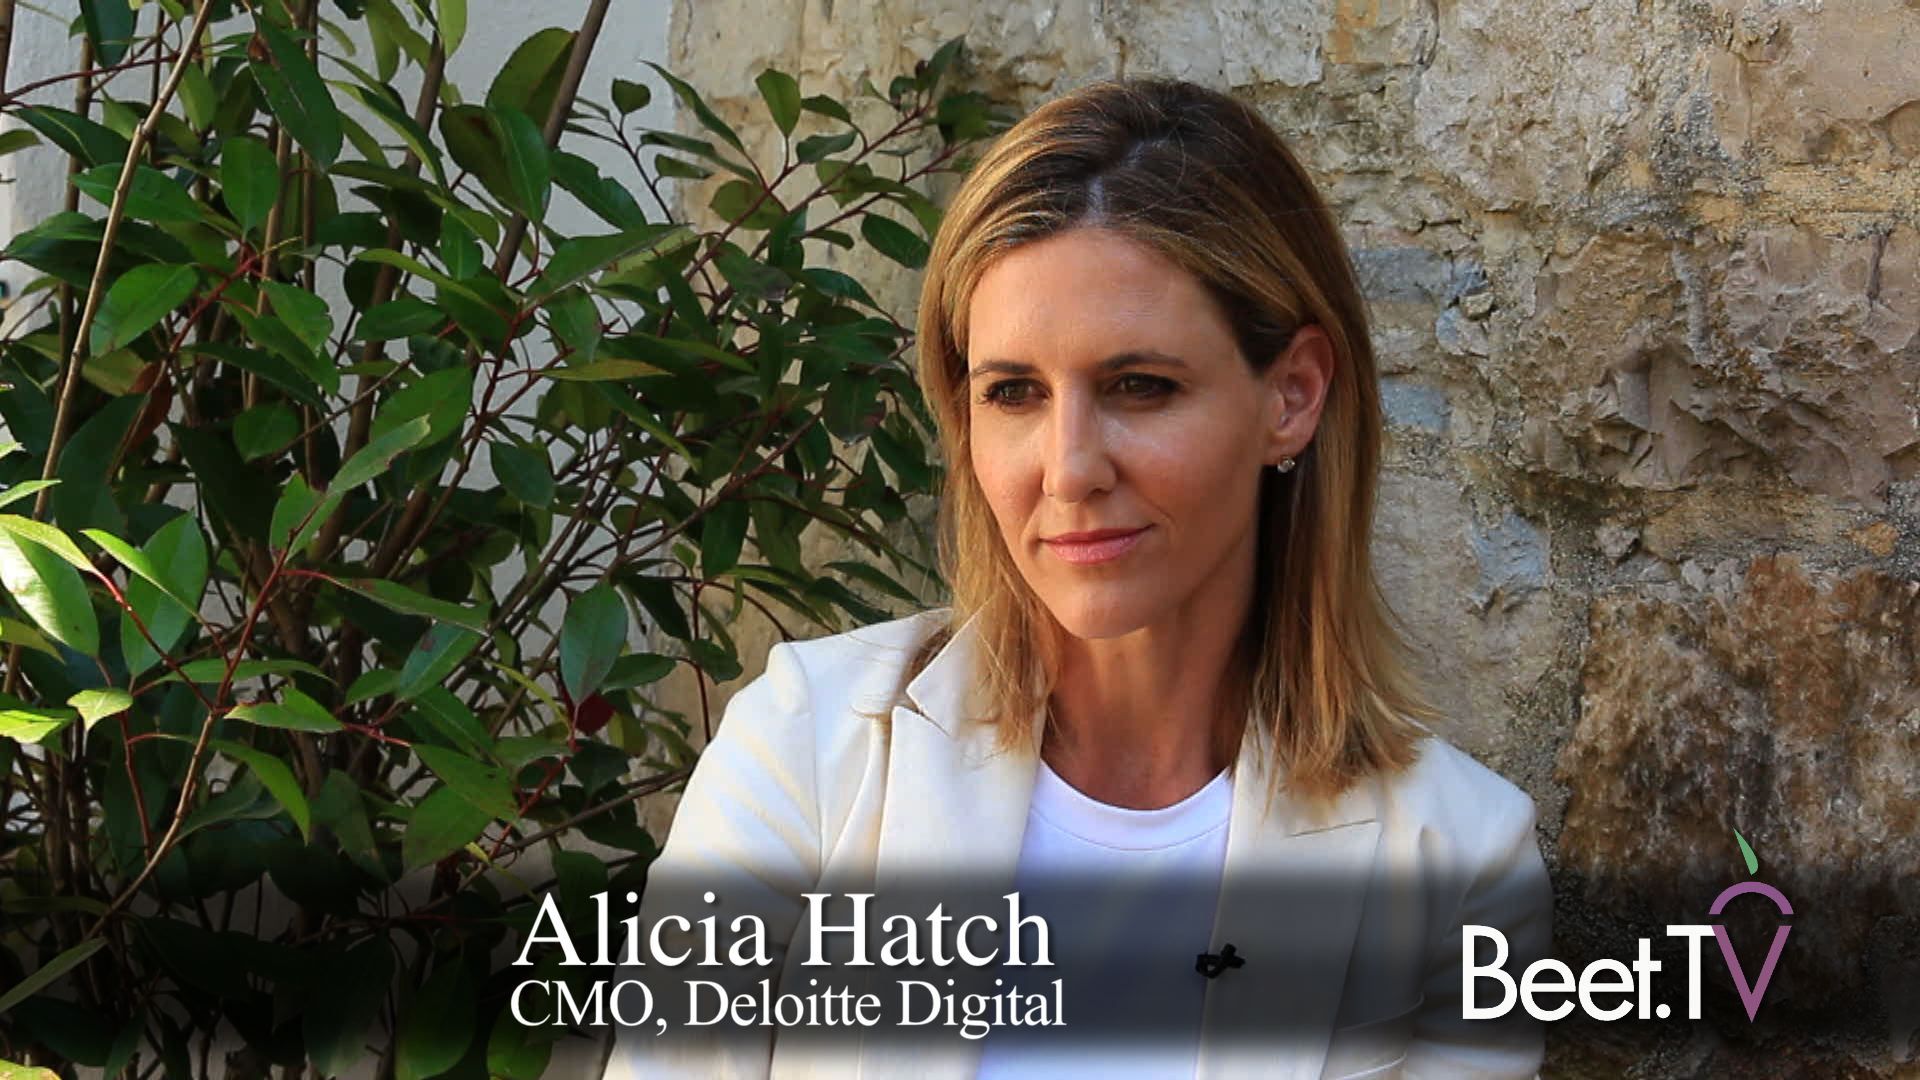 What Brands Have In Common Is A ‘Human Purpose’: Deloitte’s Hatch